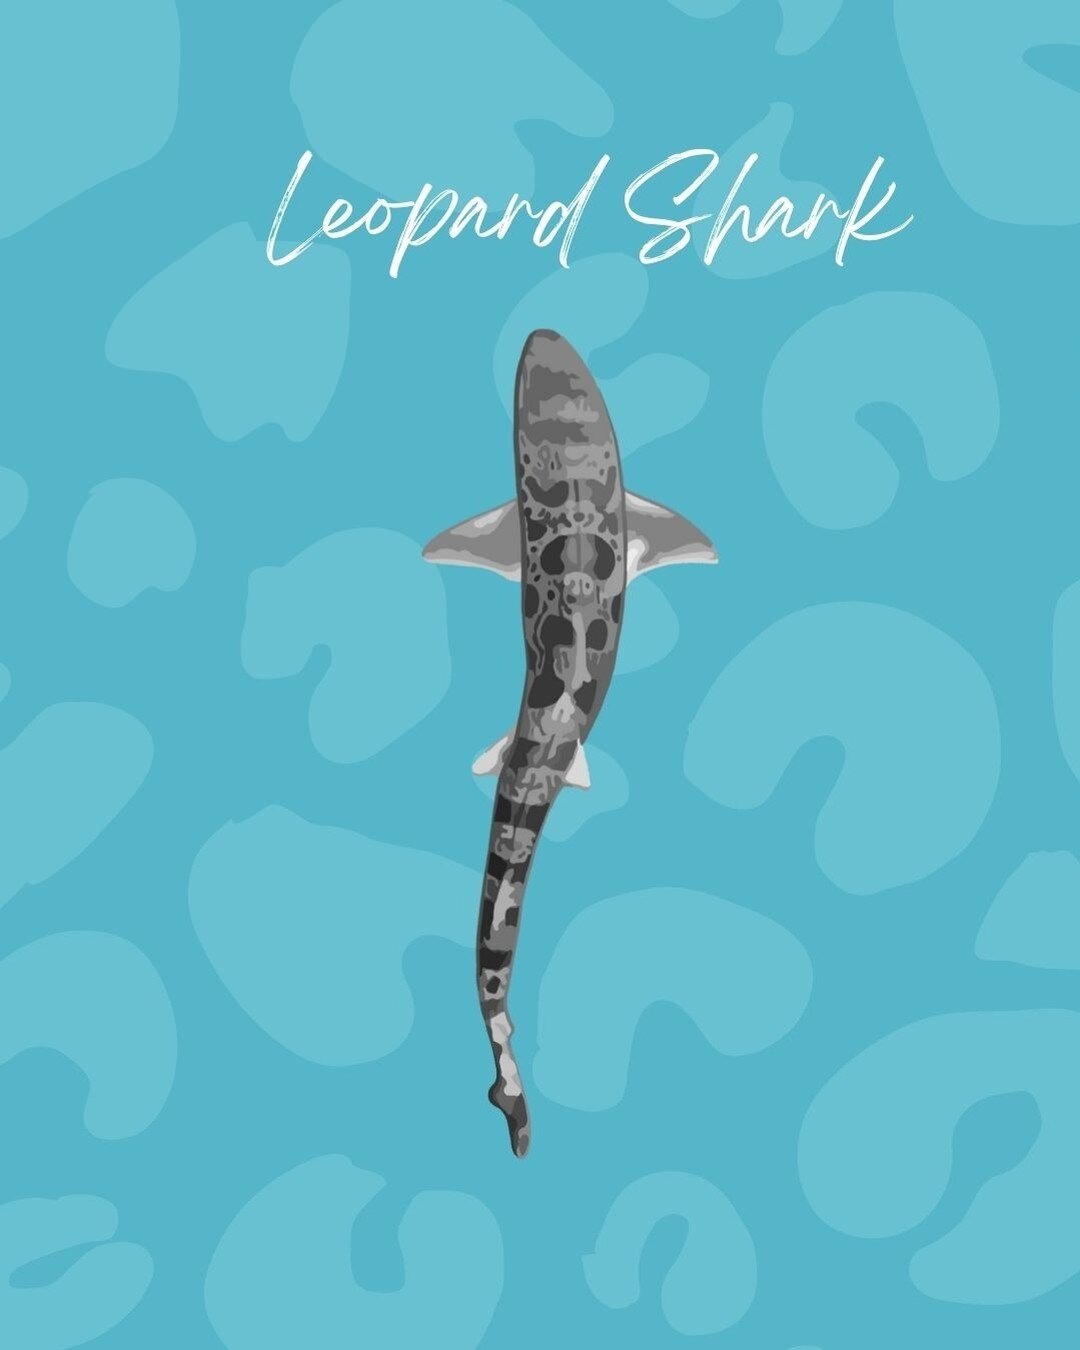 Leopard Sharks! Lets find out more about these fashionable creatures! 🐆🦈

Other than they are always in style! 😆